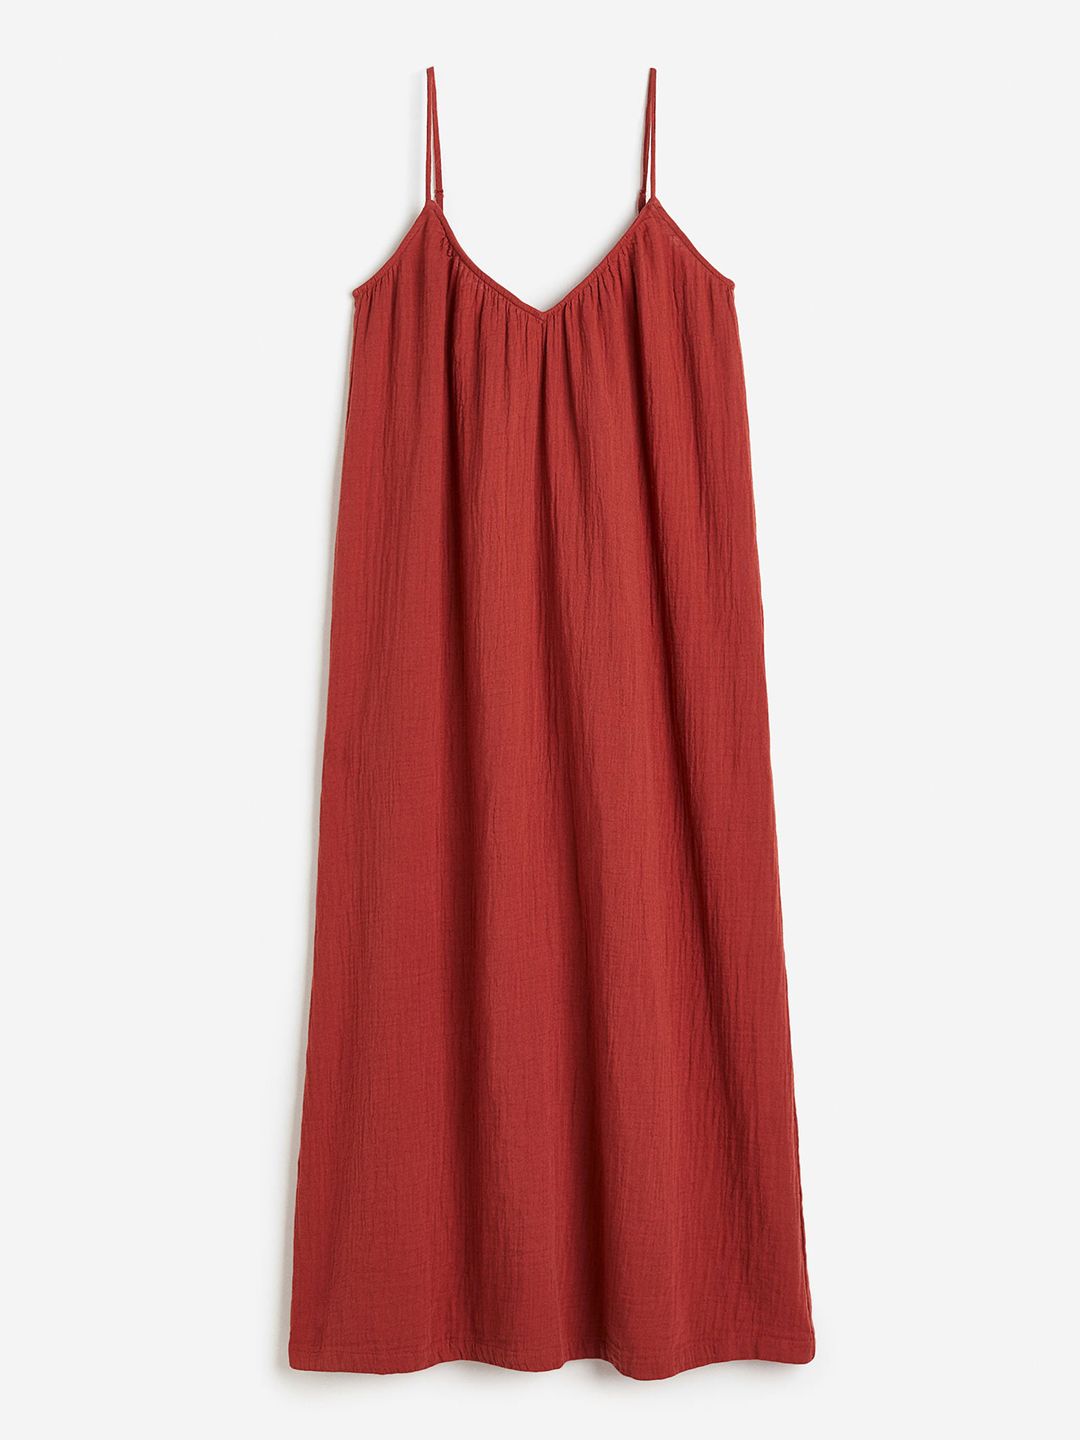 H&M Double Weave Cotton Dress Price in India